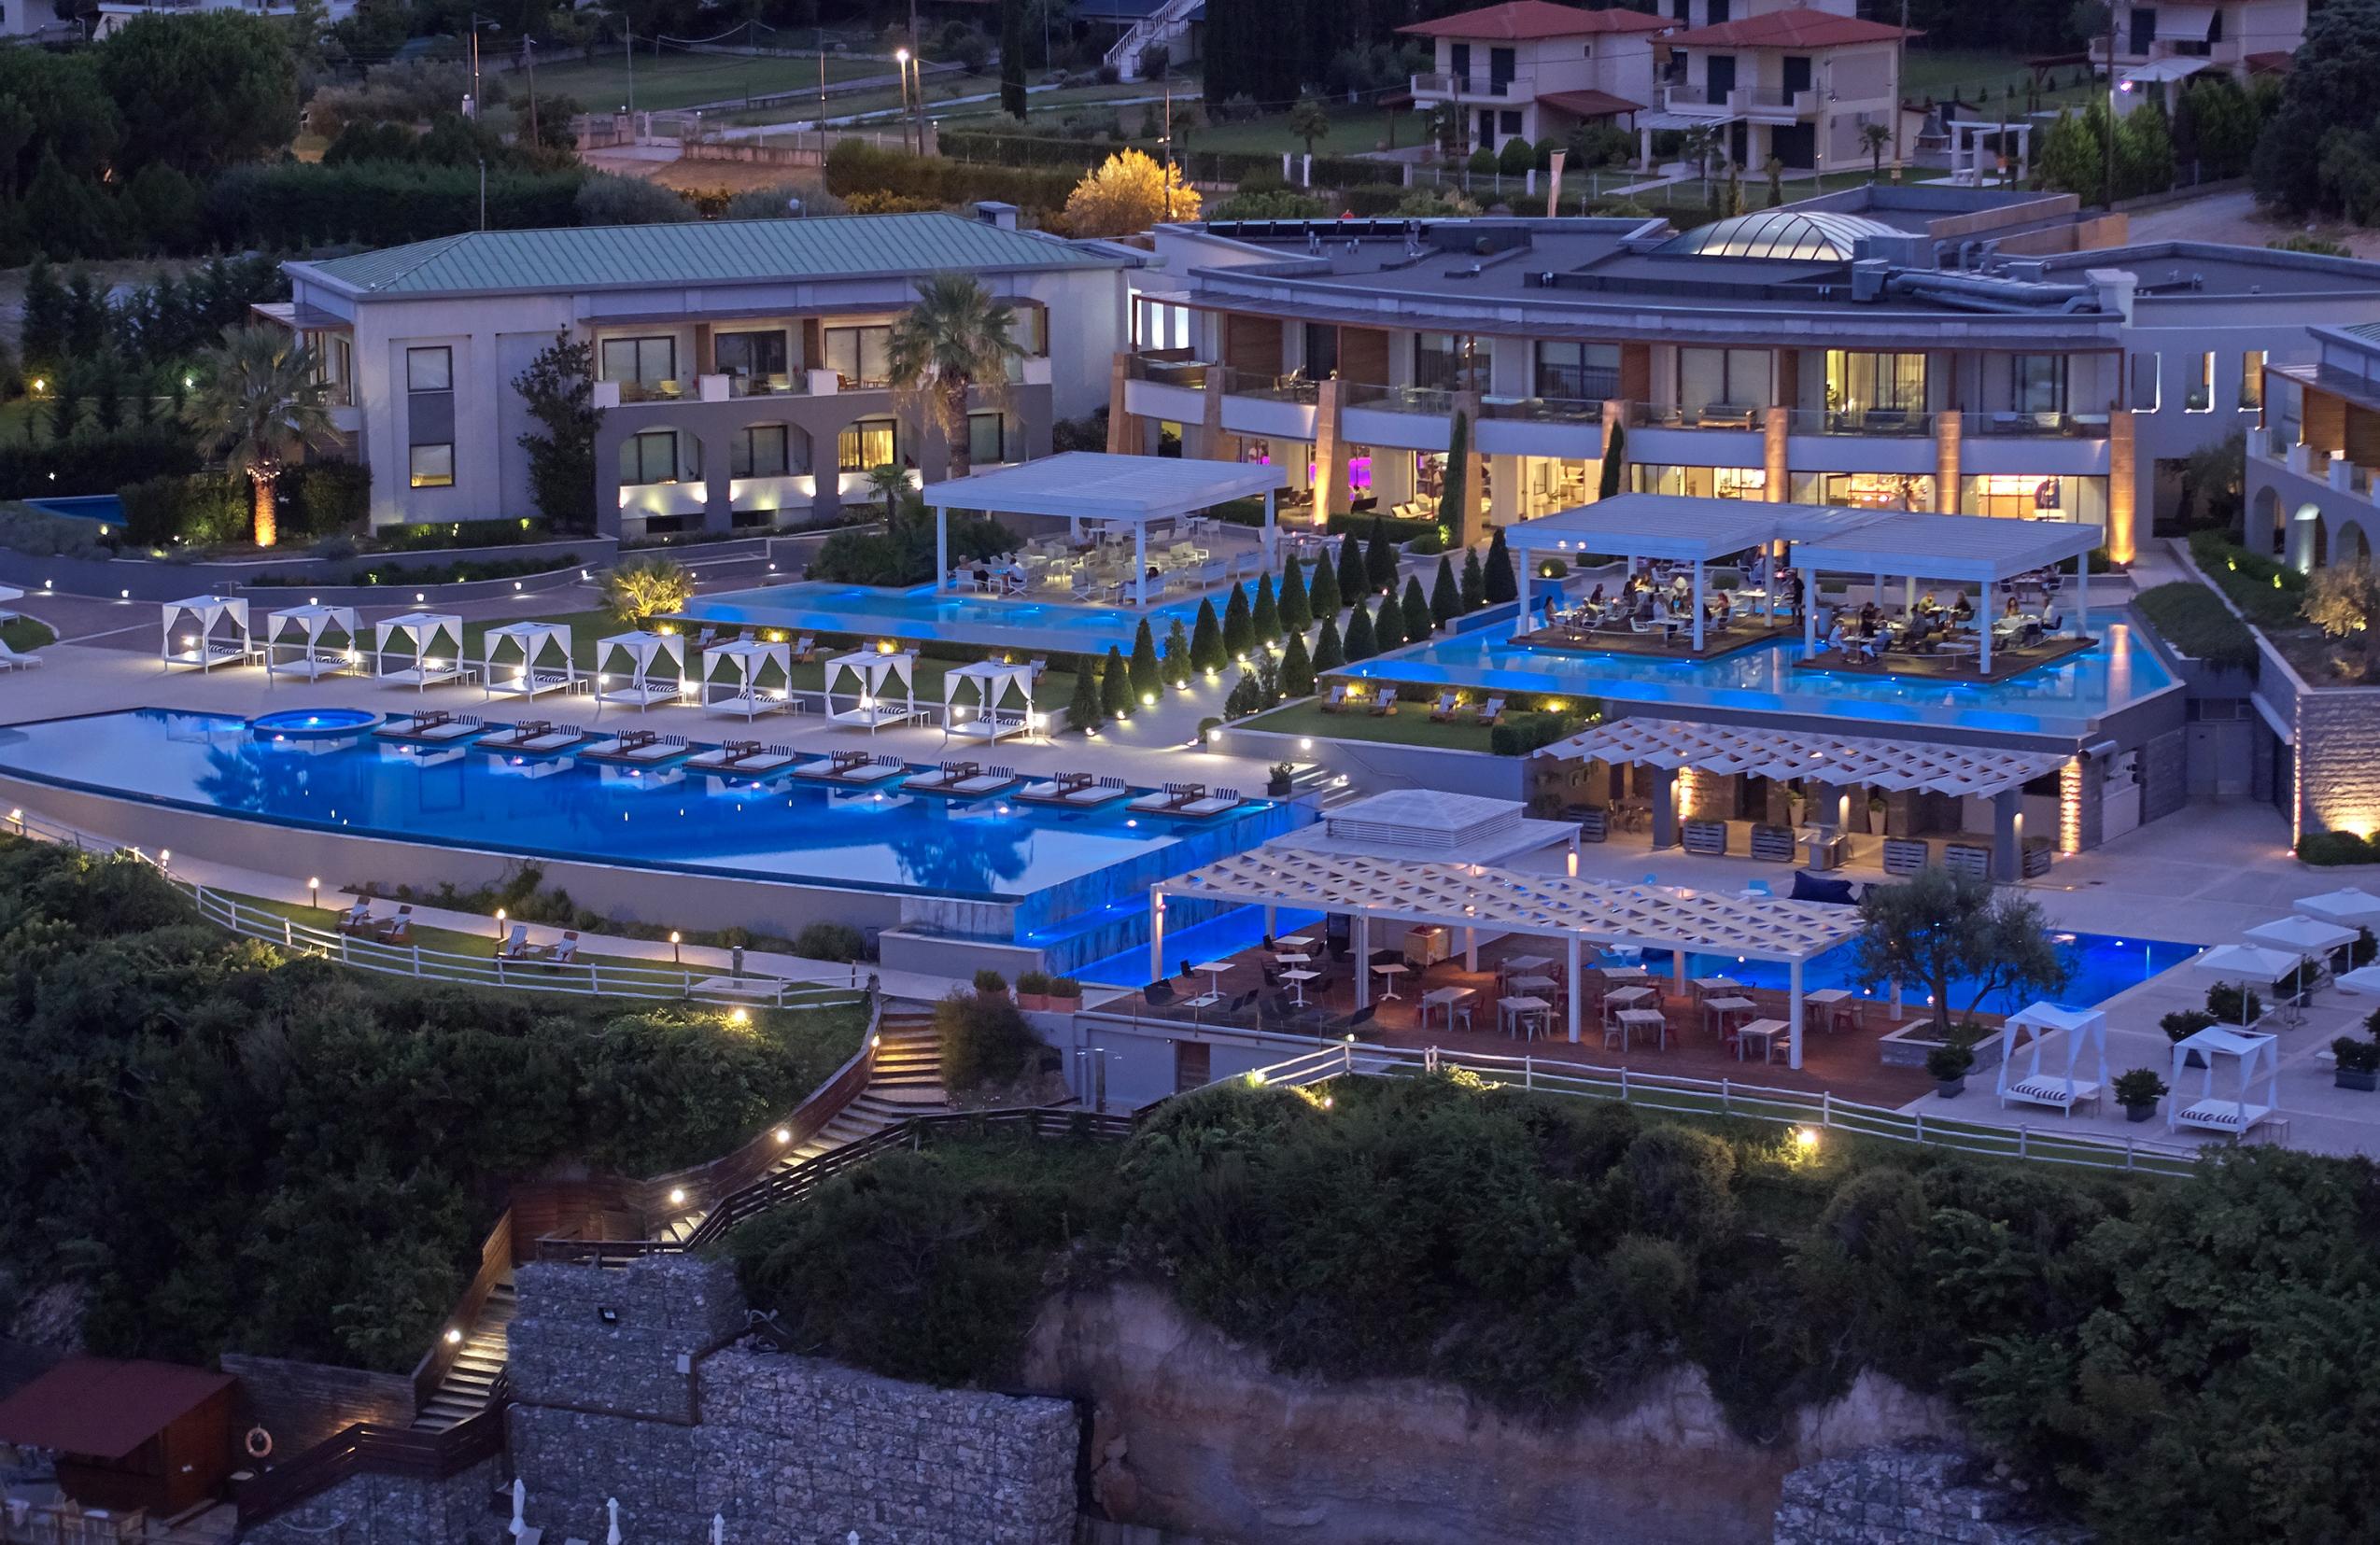 CAVO OLYMPO LUXURY HOTEL AND SPA ADULT ONLY 18+